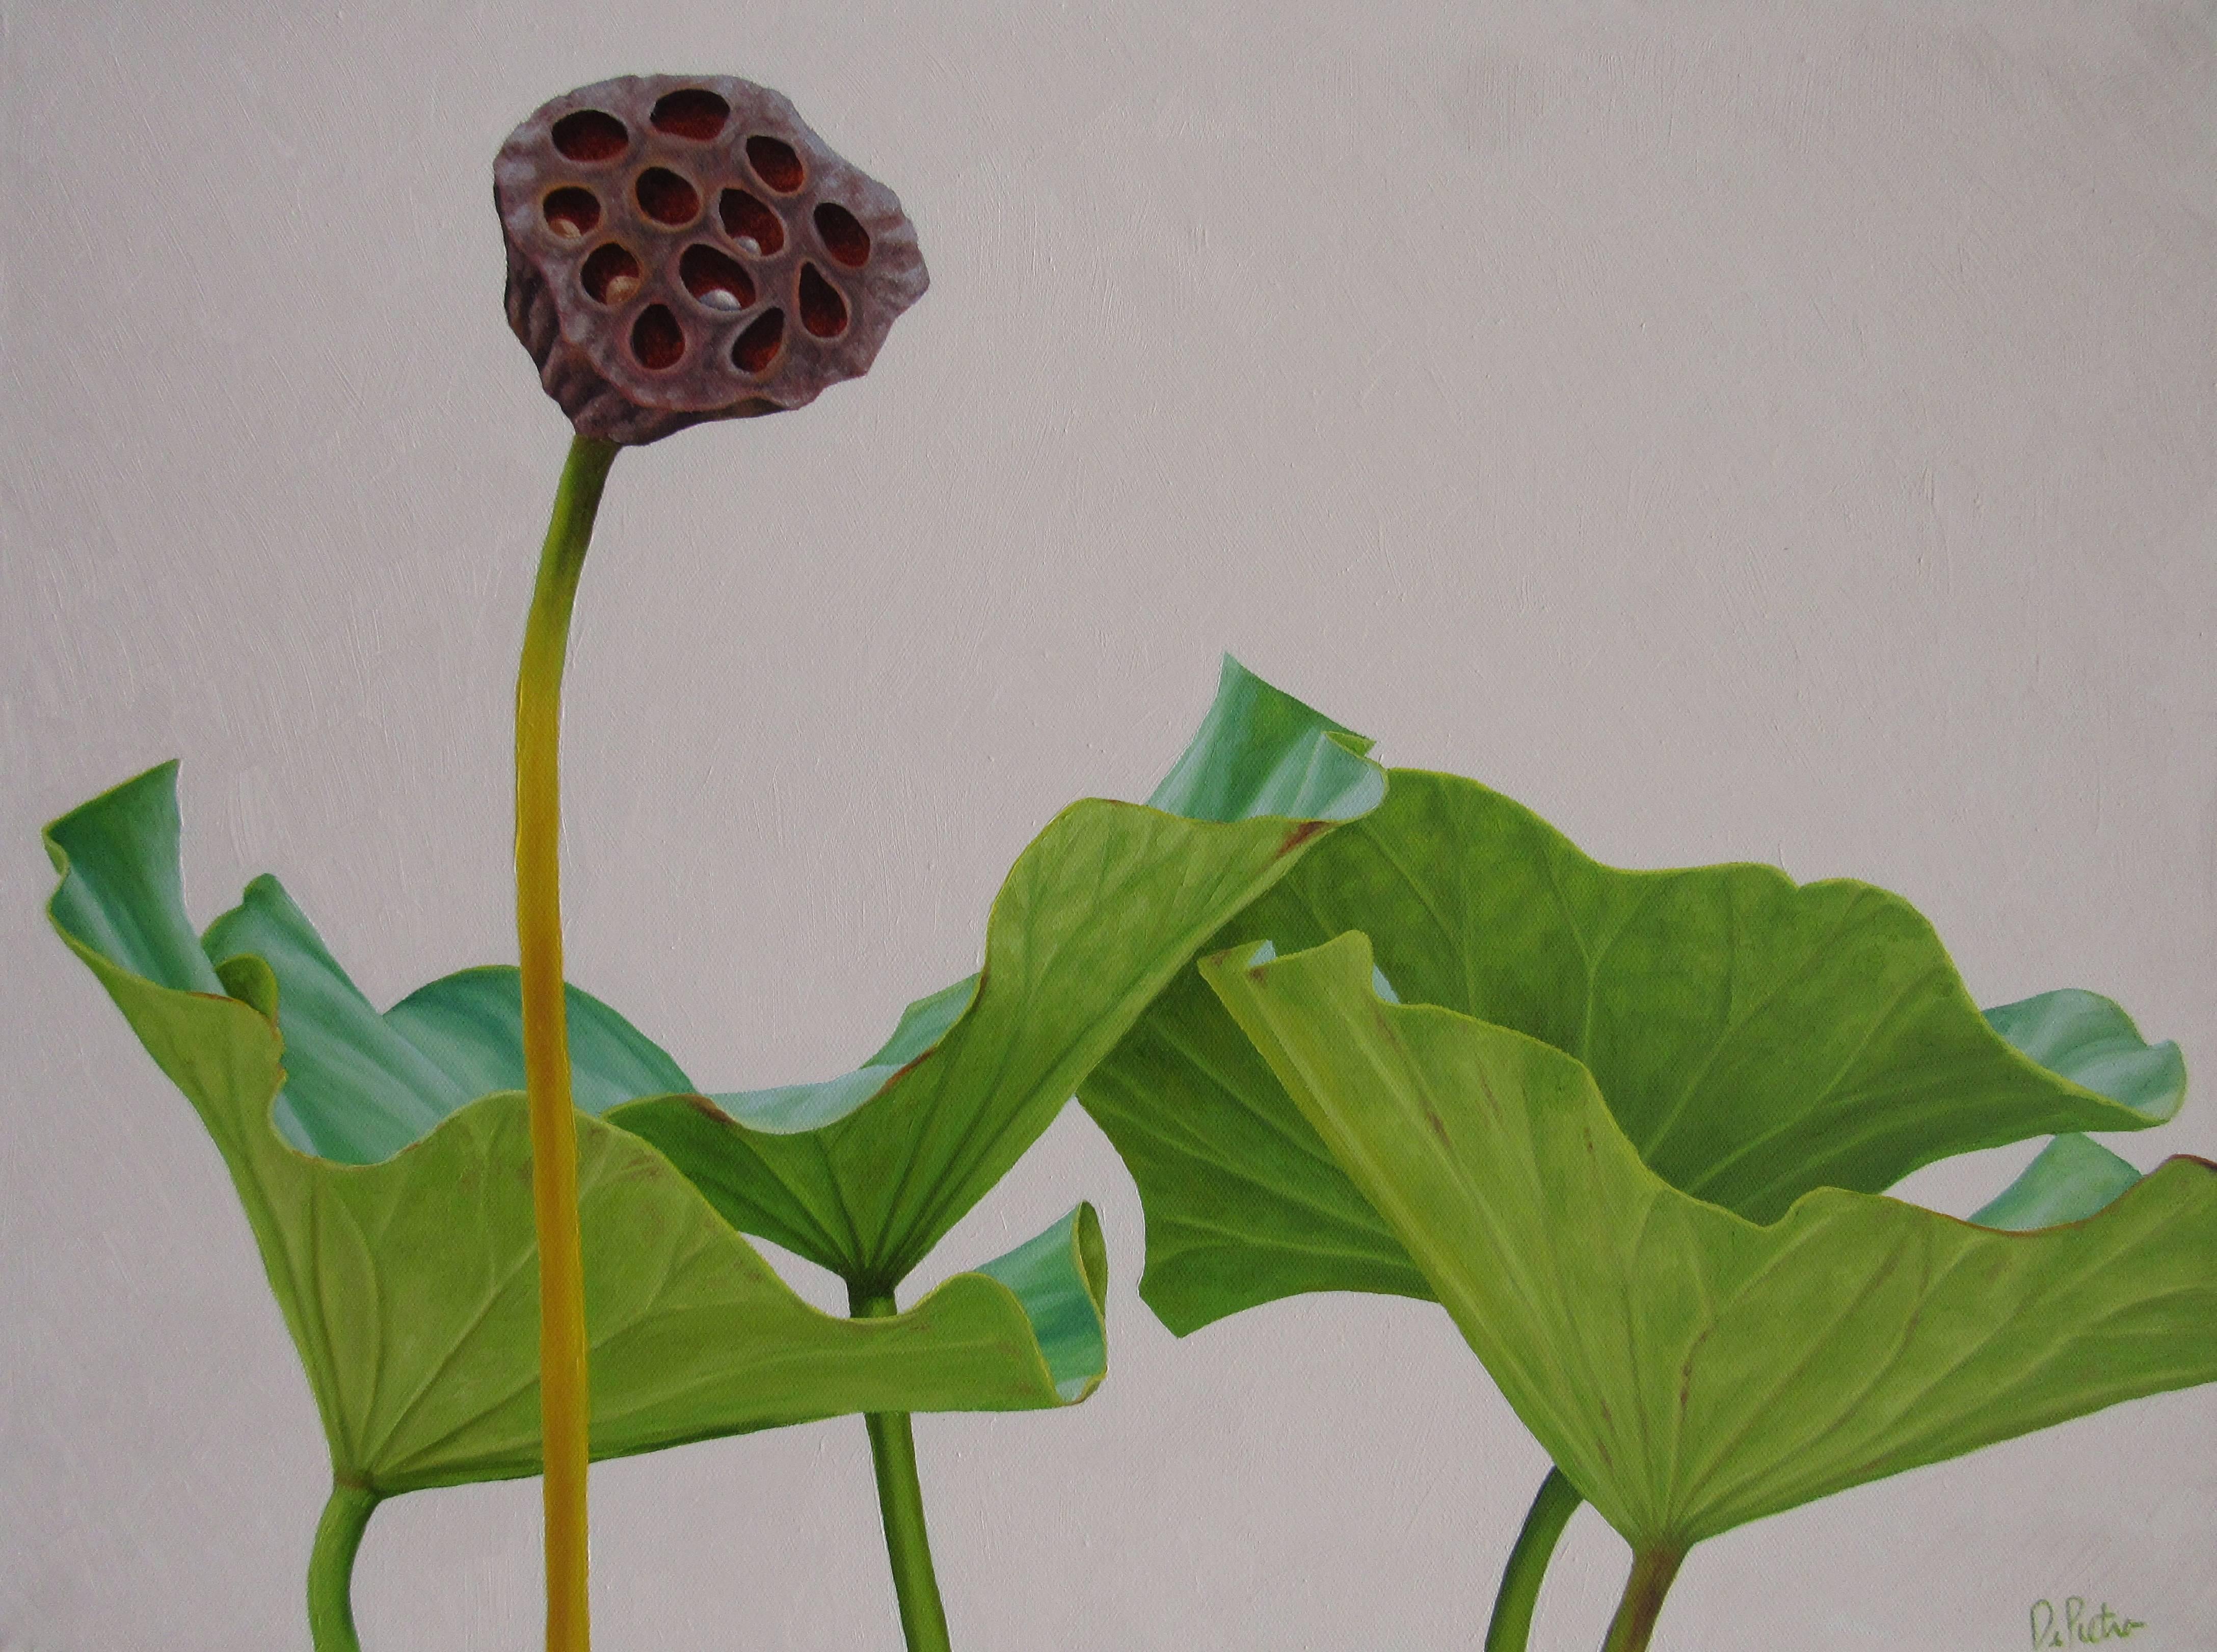 Lotus No. 7 (Hard Edge Realist Oil Painting of Lotus Leaves and stems)